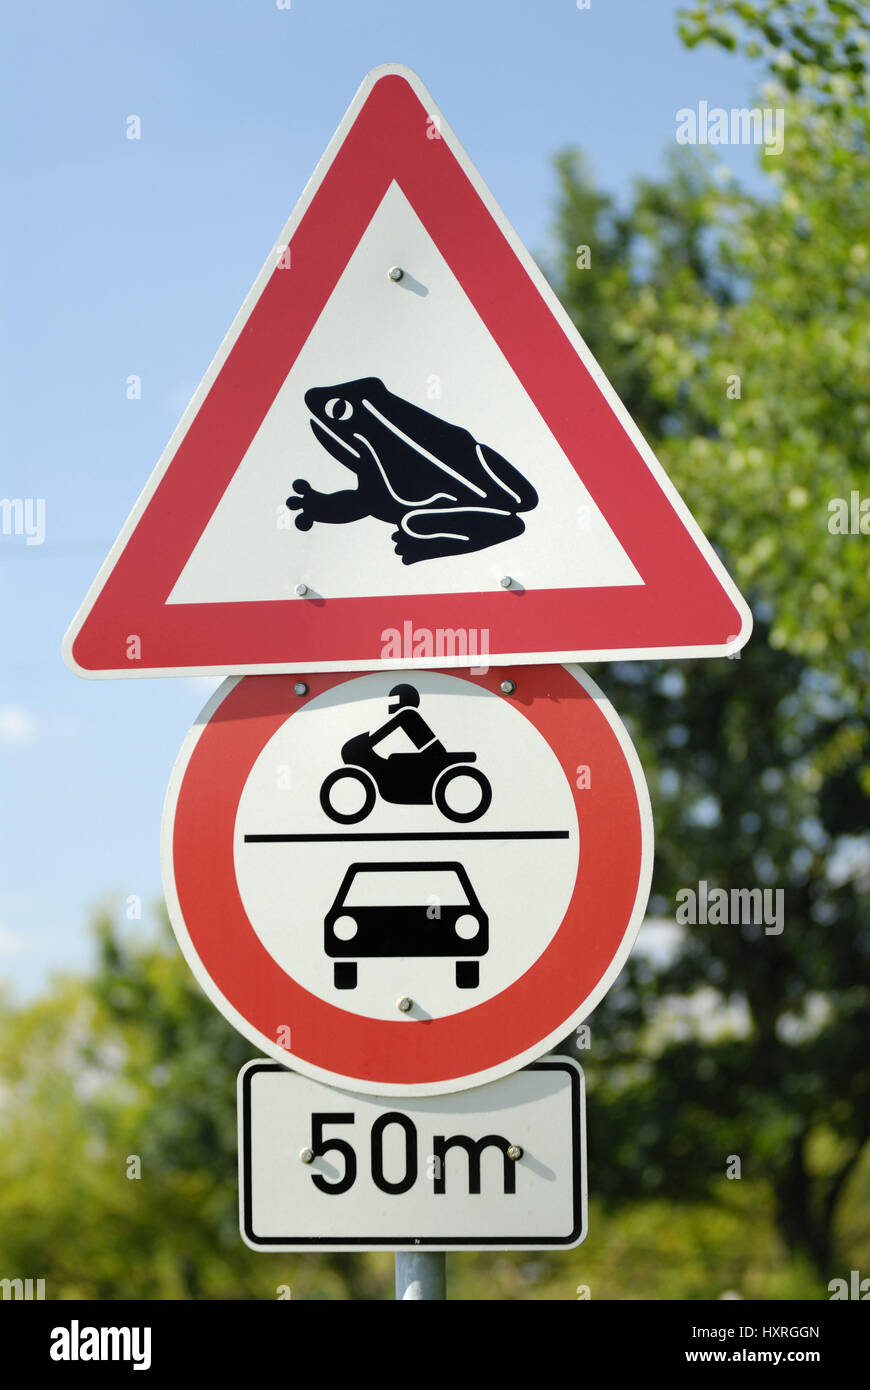 Animal, animals, toad, toads, earth toad, earth toads, toad wandering, traffic, Stra? enverkehr, road sign, road signs, sign, signs, warning, warnings Stock Photo